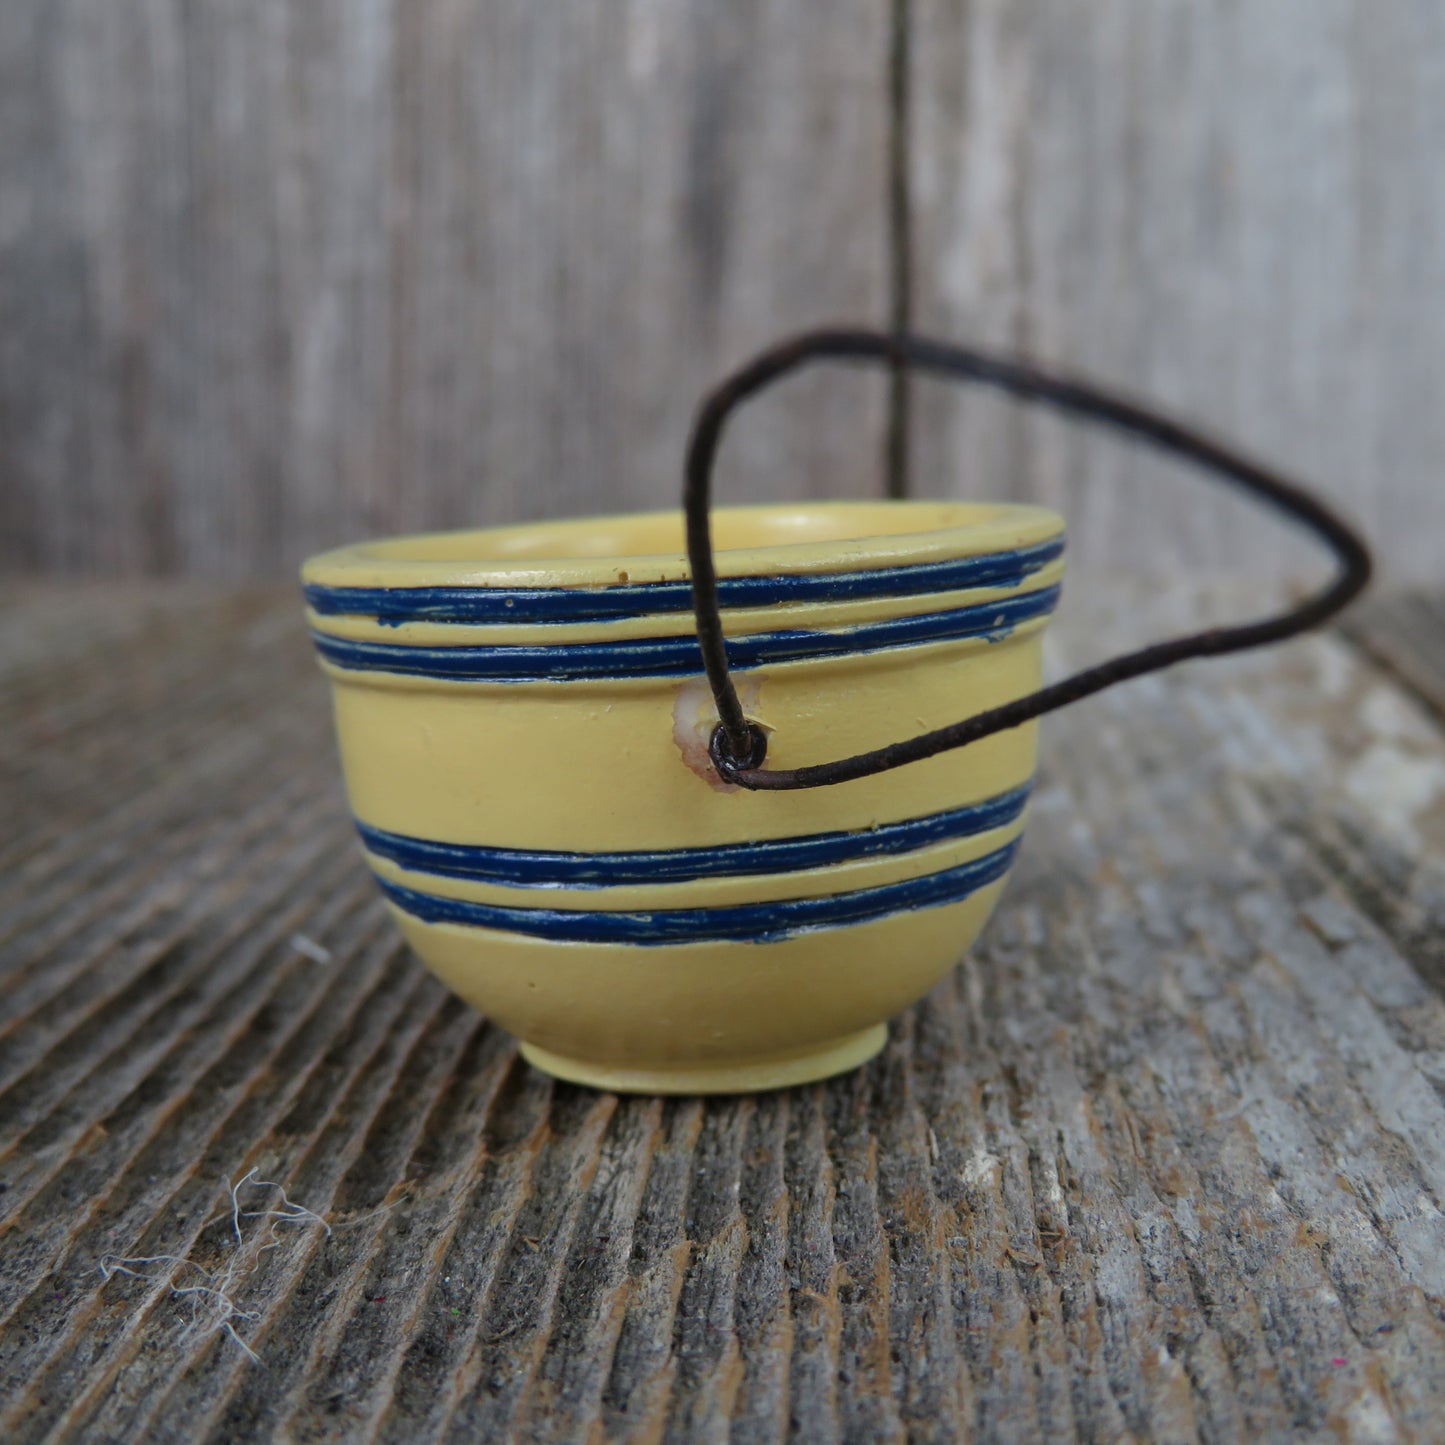 Vintage Yellow Mixing Bowl Ornament Wood Blue Rings Bands Stoneware Pottery Like Christmas Miniature Dollhouse - At Grandma's Table